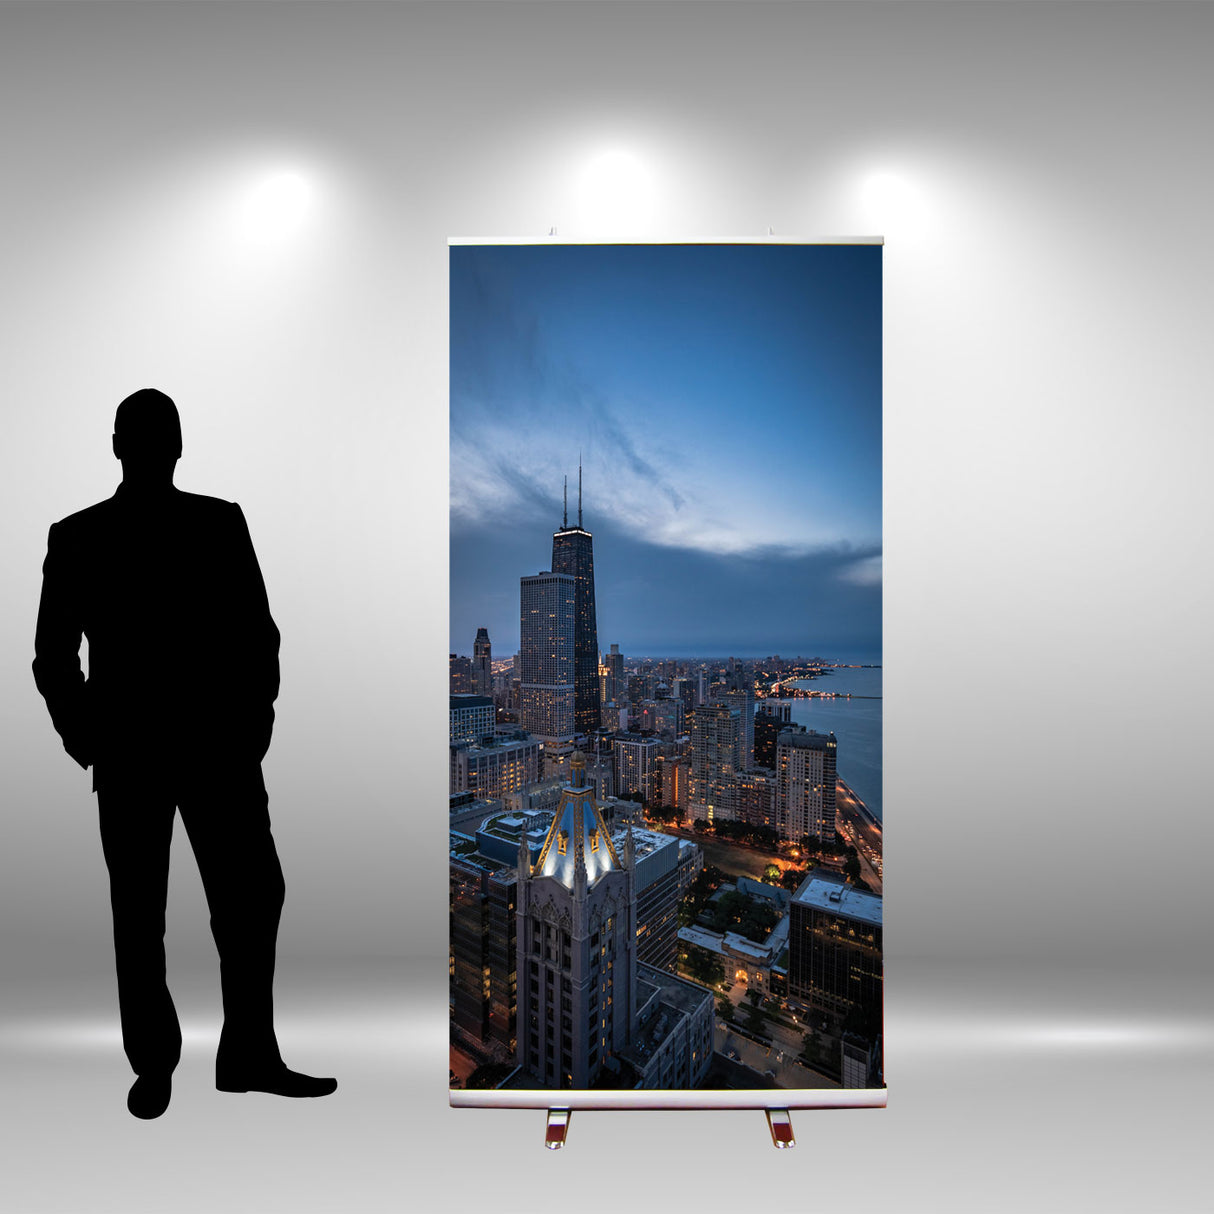 48" Retractable Banner Stand